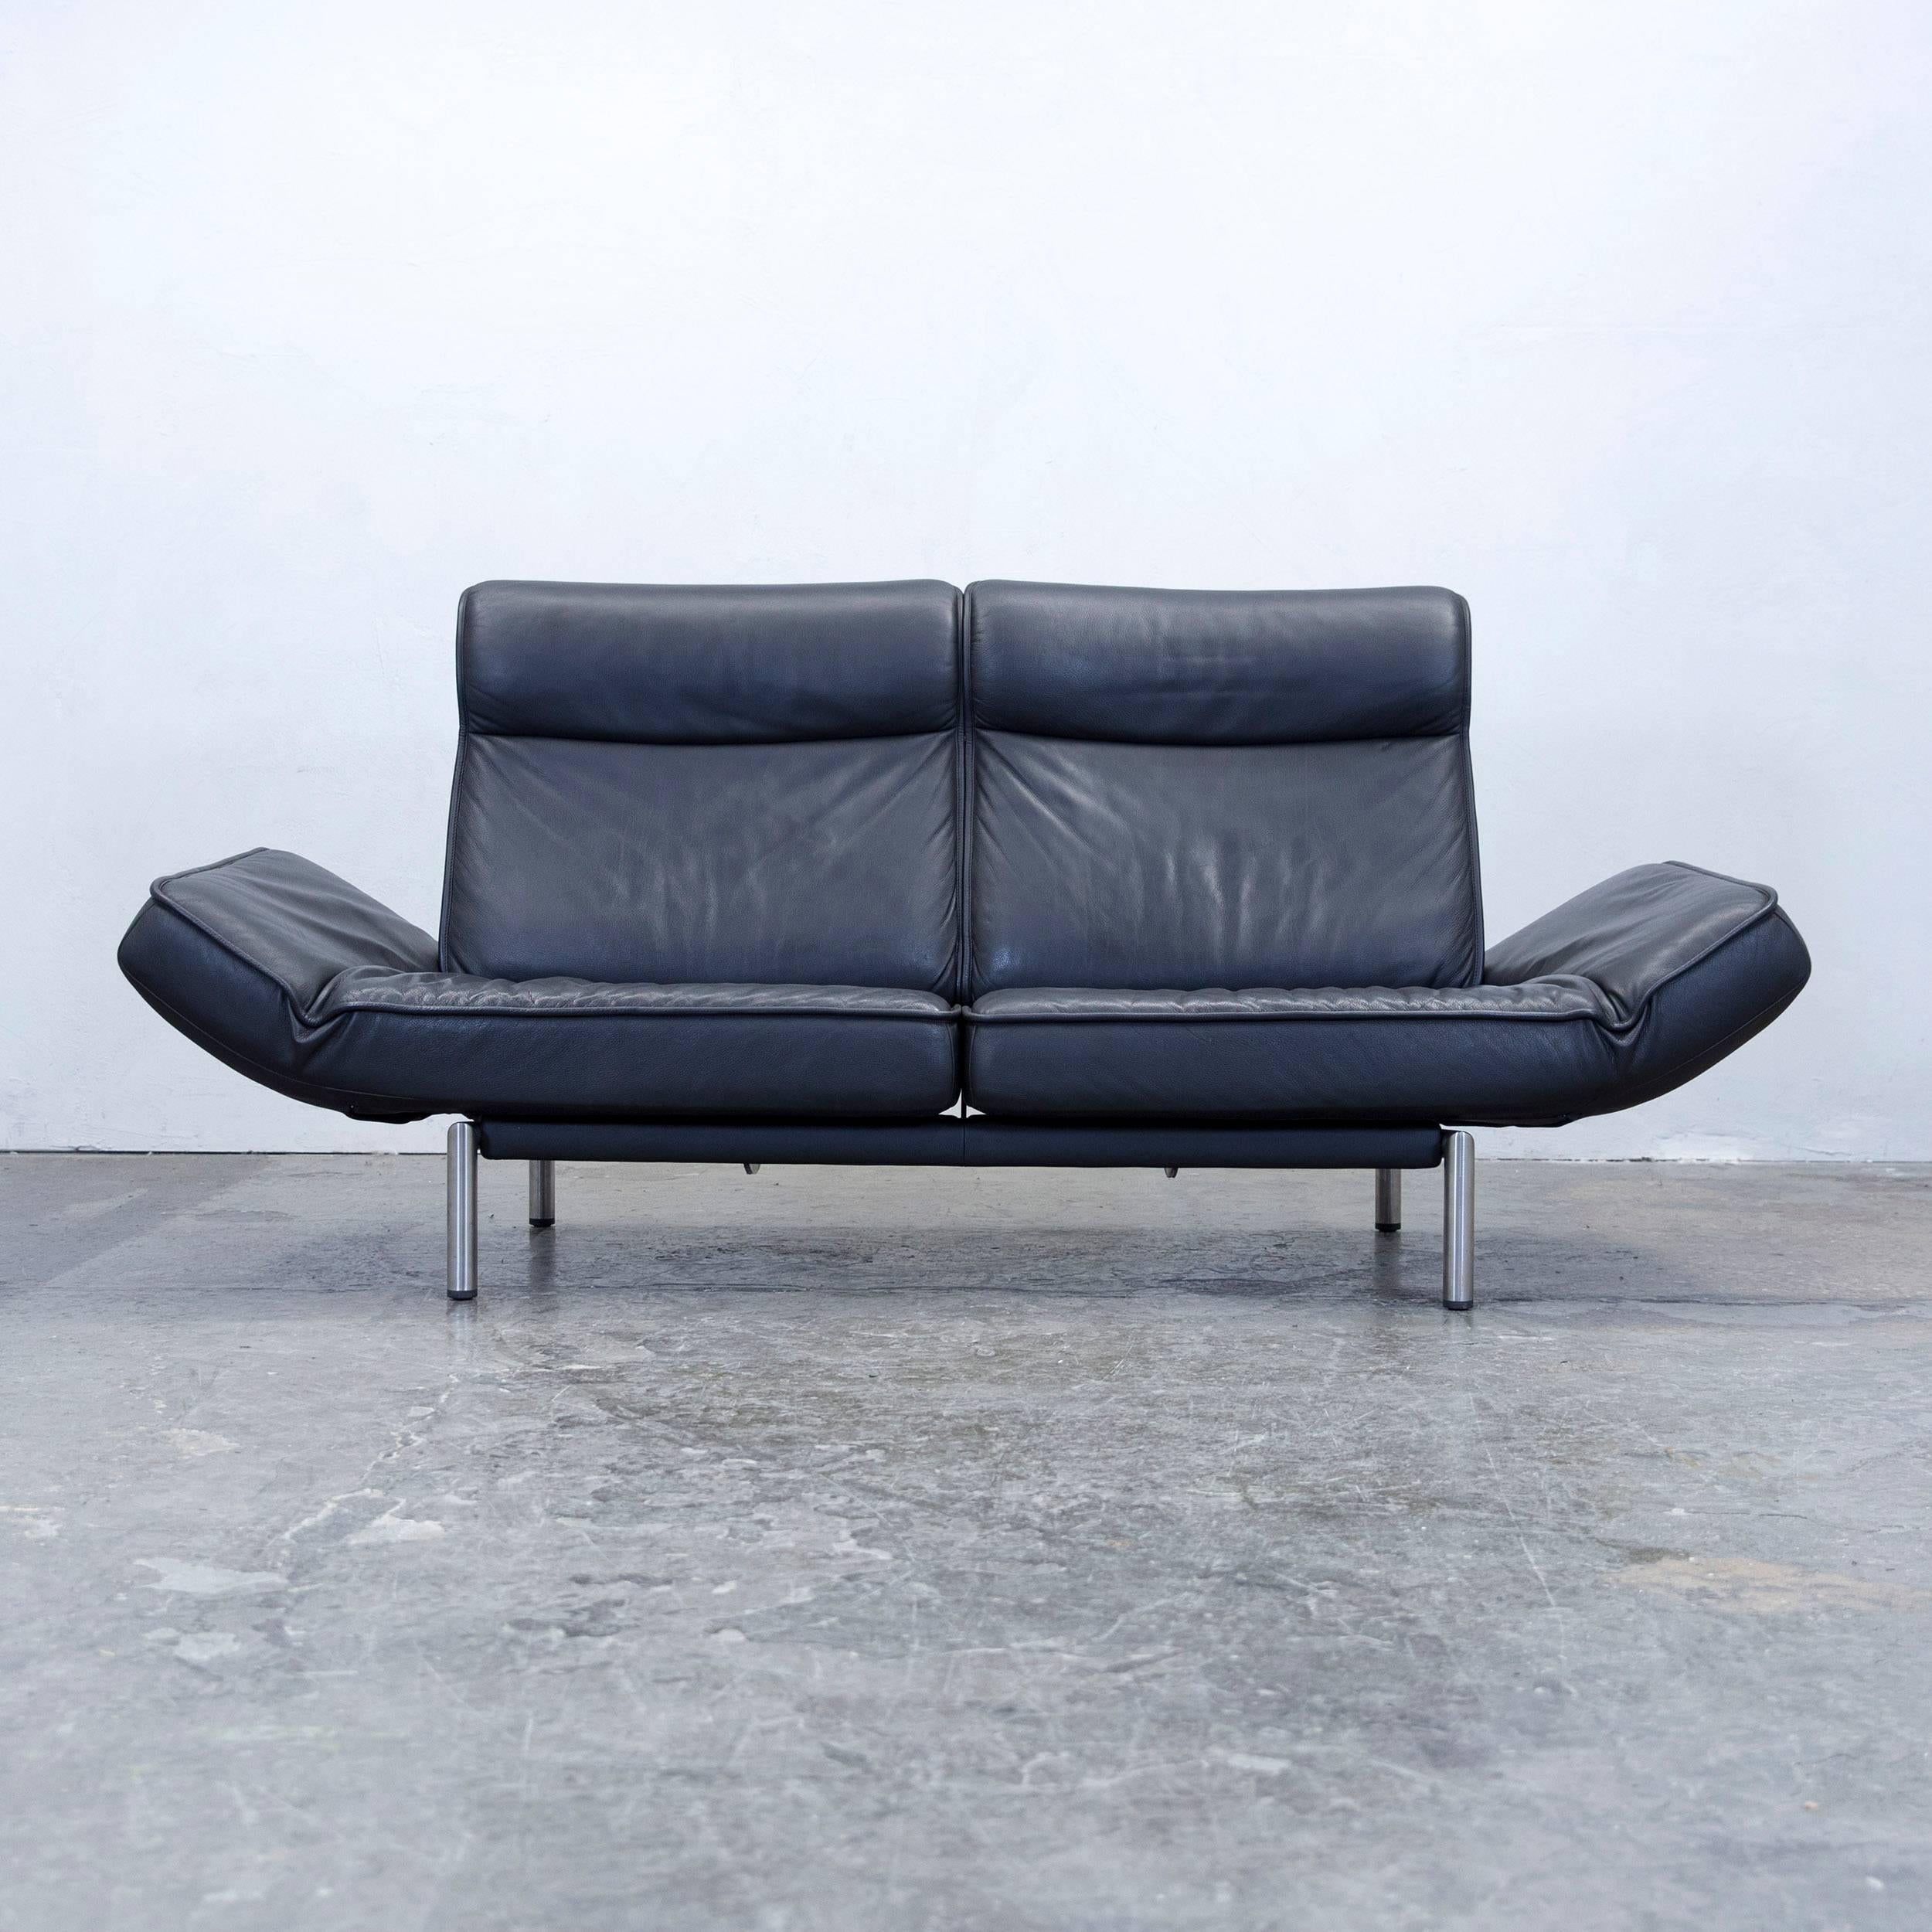 Black colored original De Sede DS 450 designer leather sofa in a minimalistic and modern design, with convenient functions, made for pure comfort and flexibility.